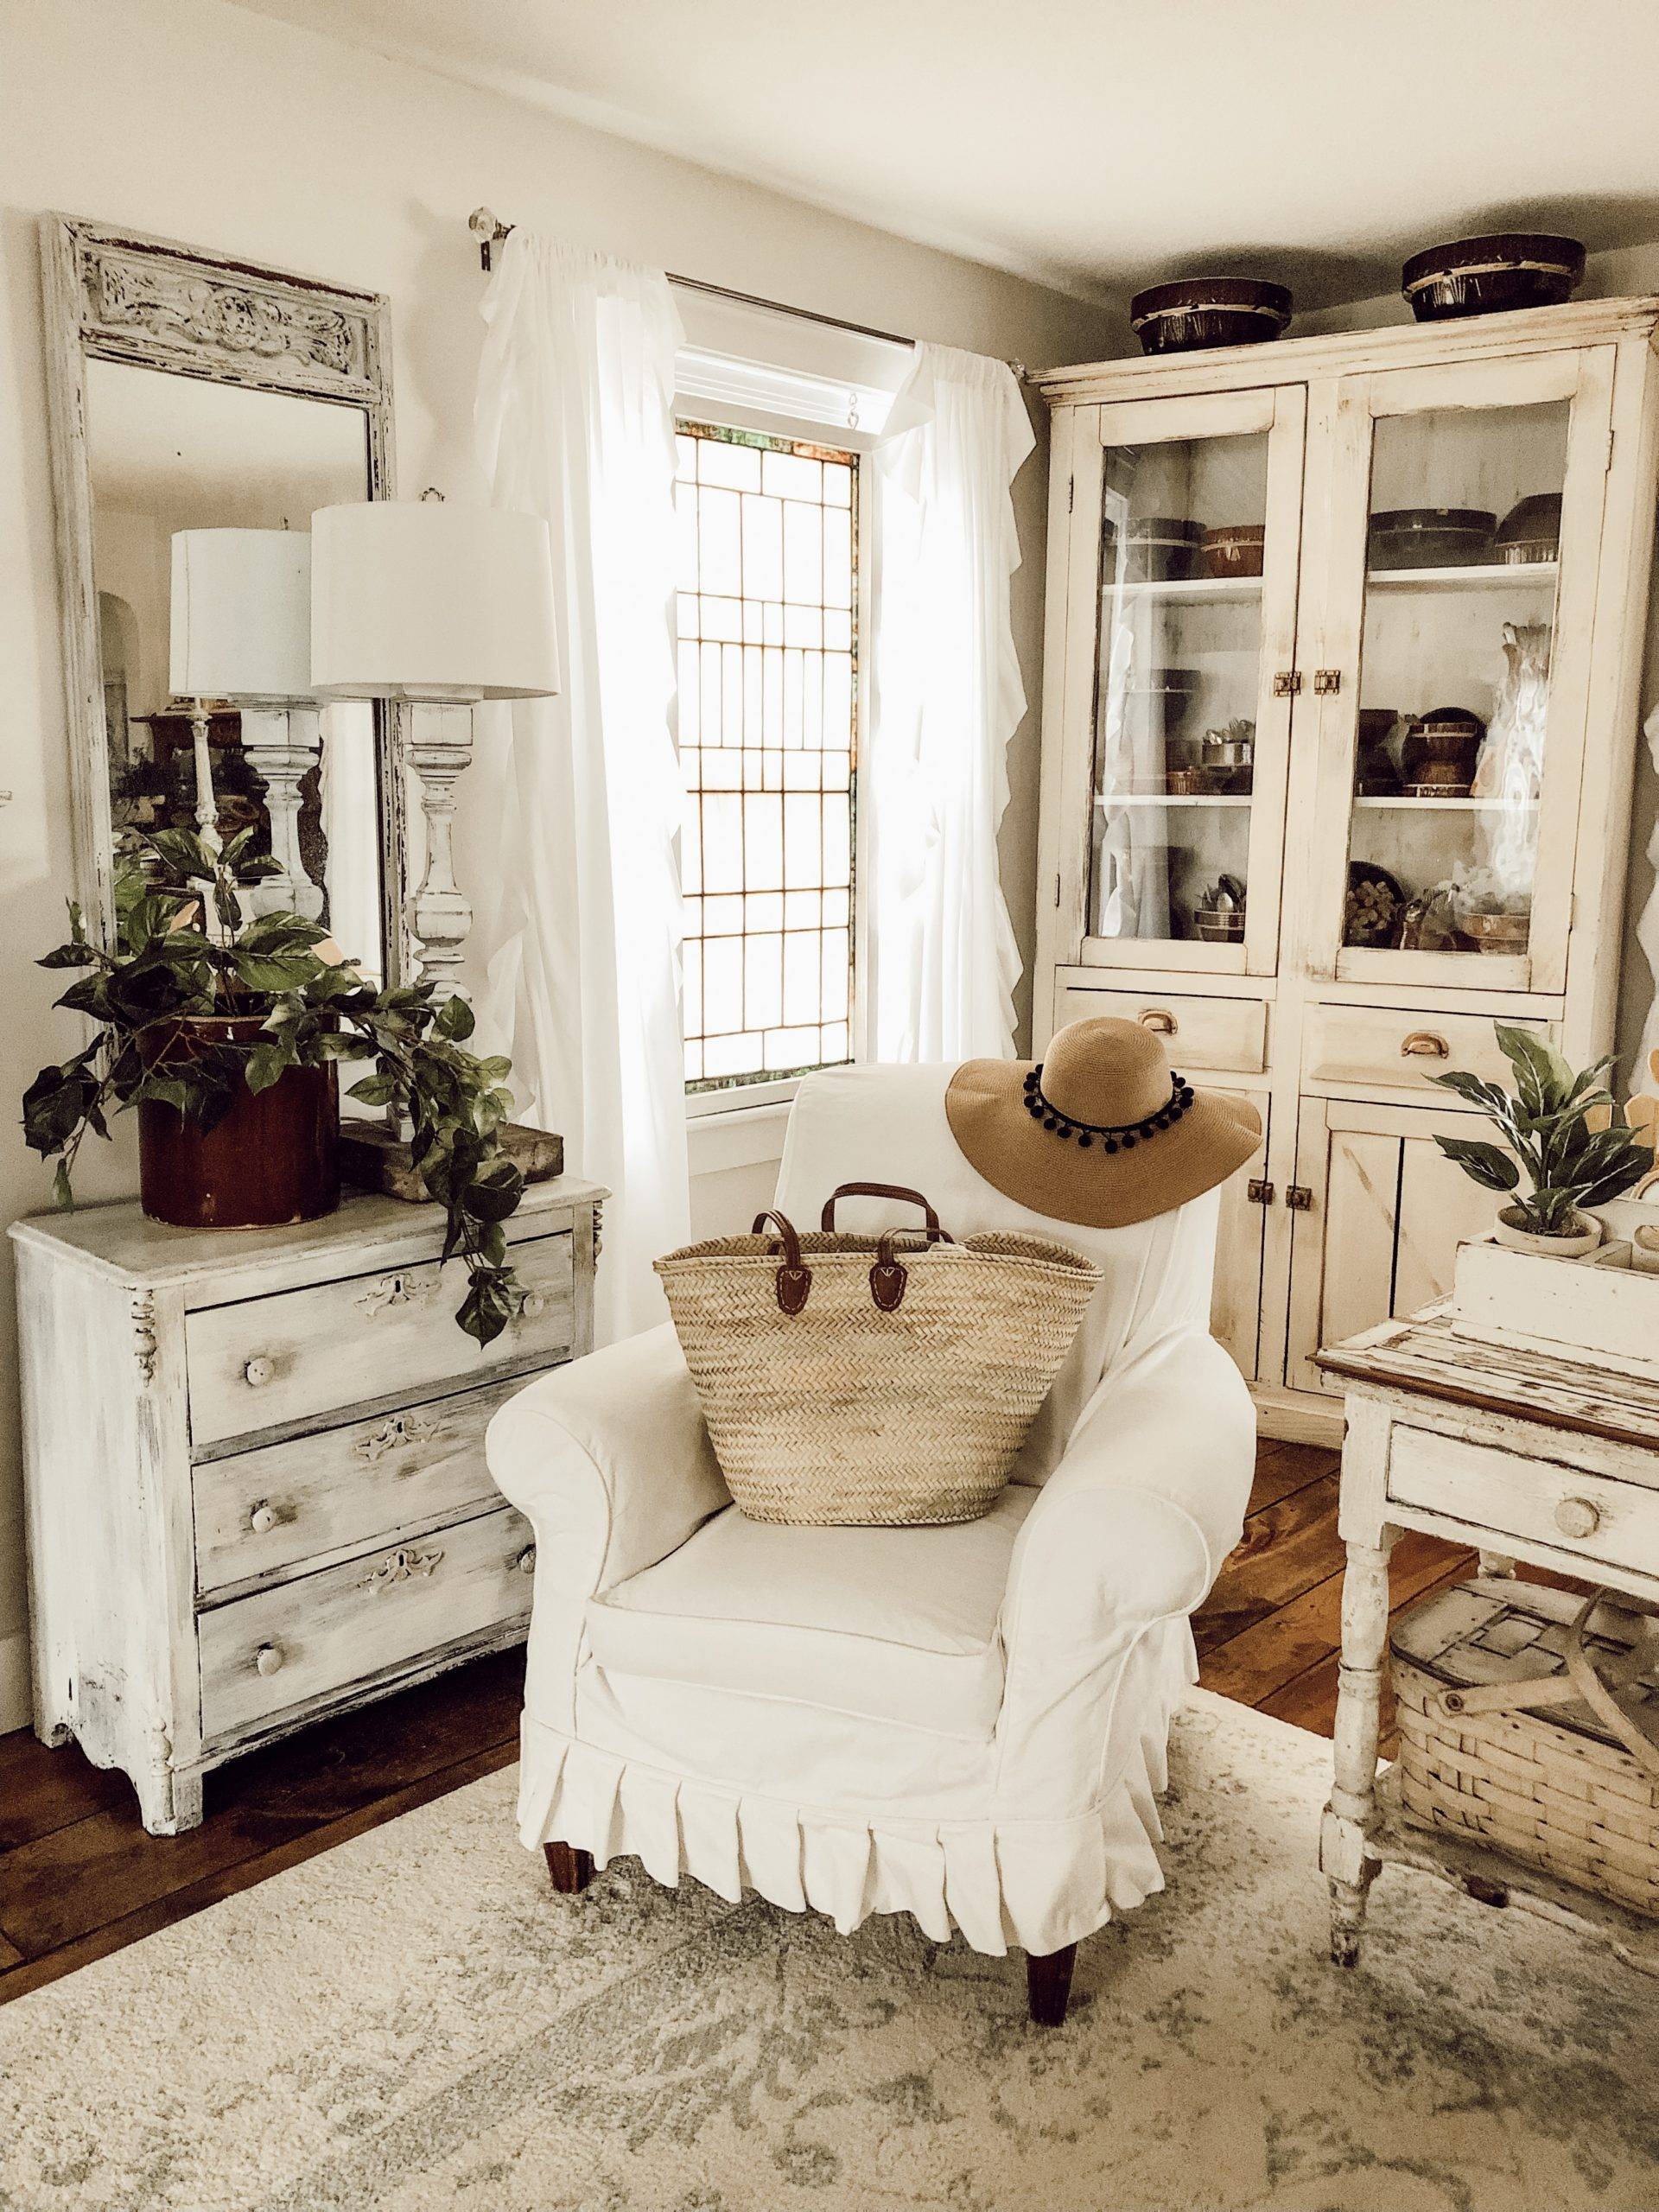 Shabby Chic Spring Living Space [photo by Danelle Harvey]